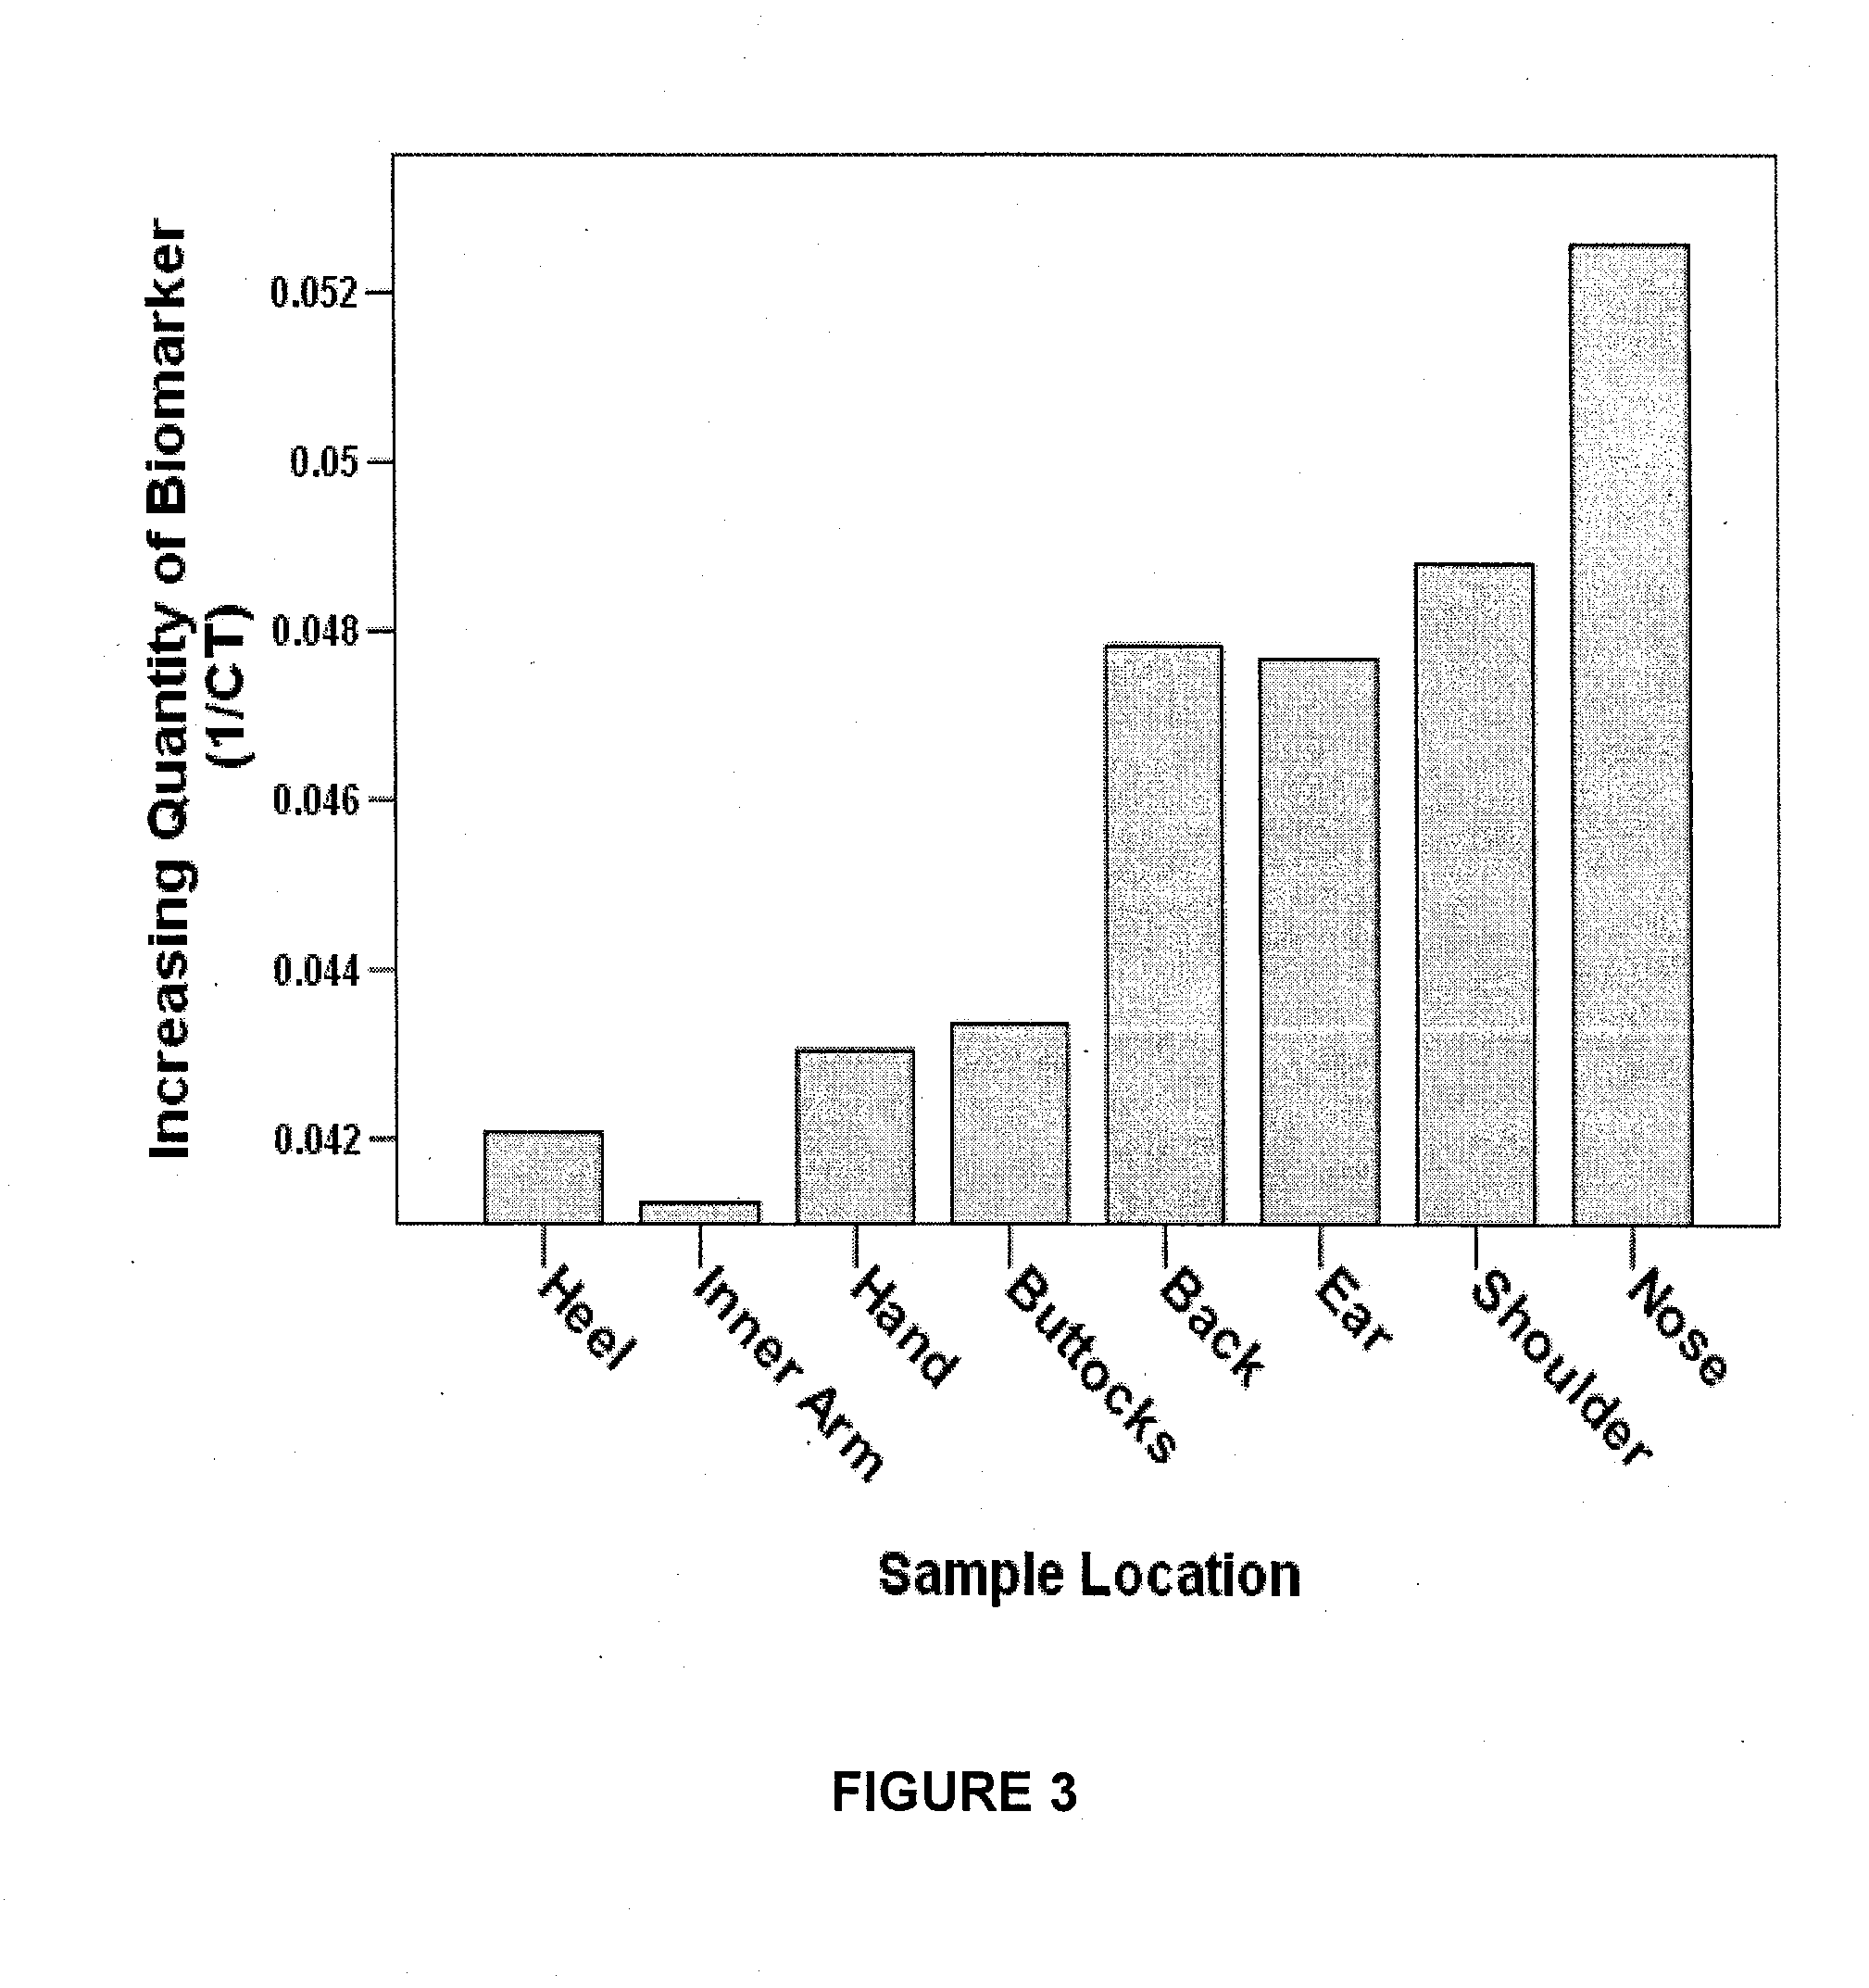 Methods for Assaying MC1R Variants and Mitochondrial Markers in Skin Samples